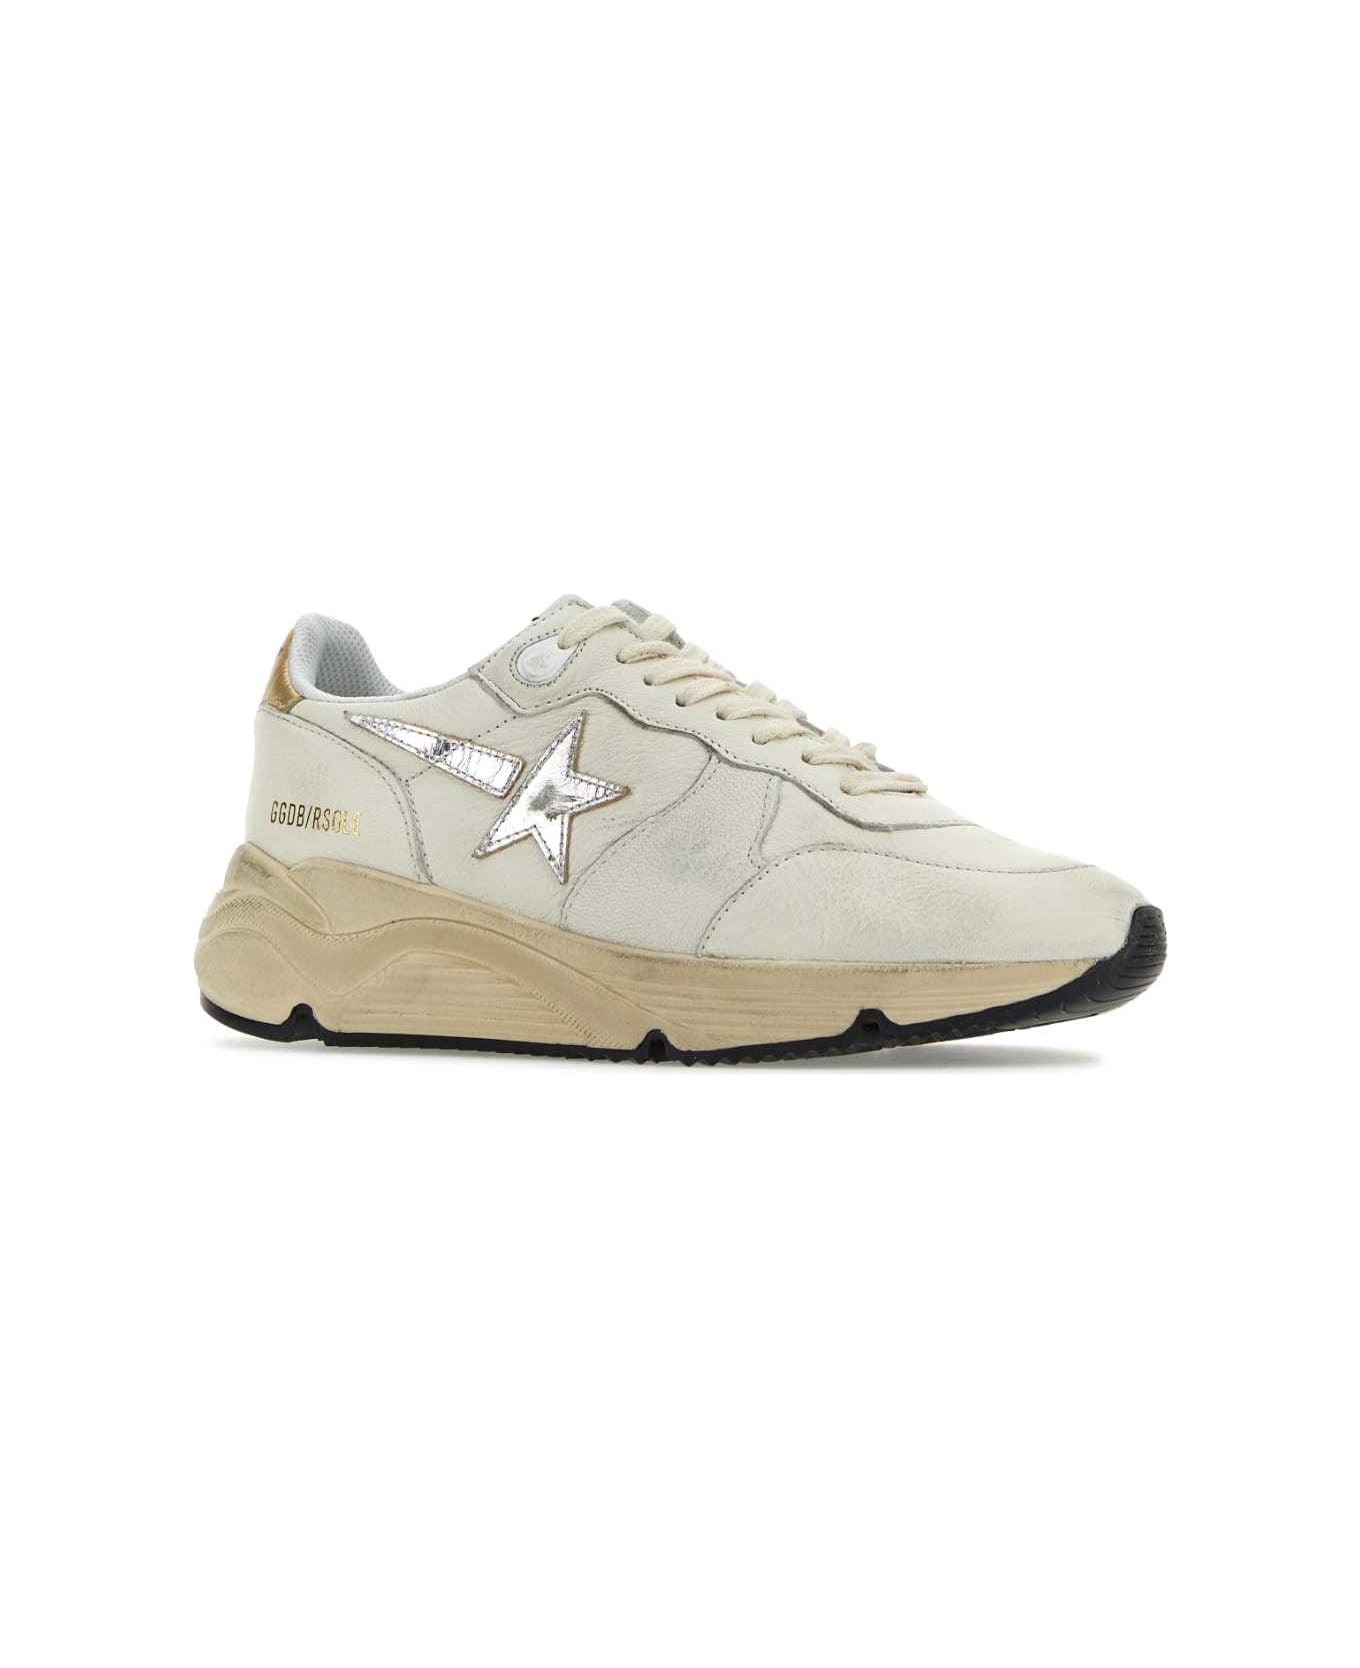 Golden Goose Ivory Leather Running Sole Sneakers - WHITESILVERGOLD